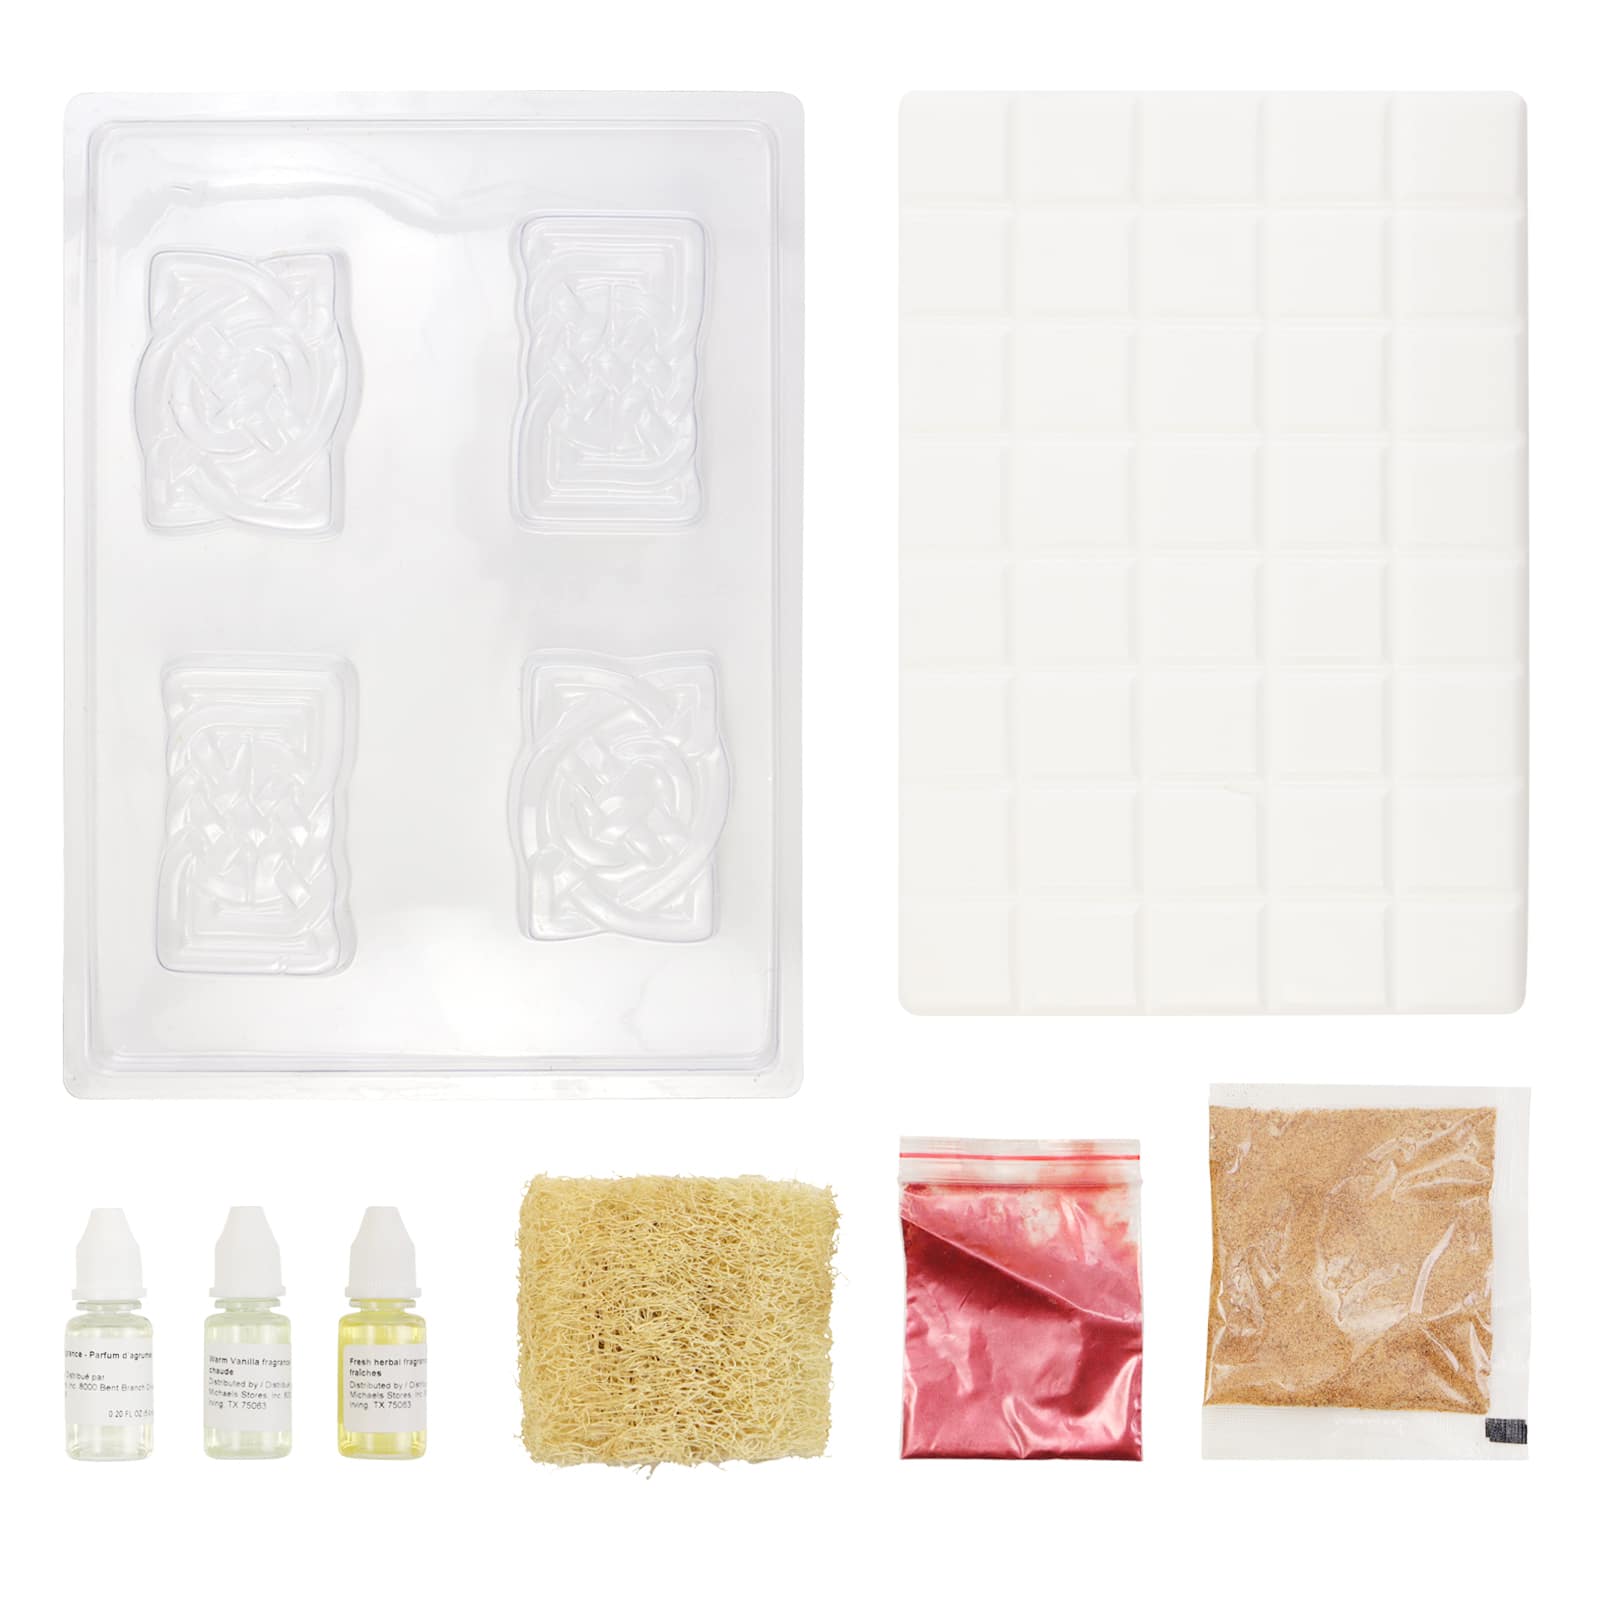  Illumive Soap Making Kit-Includes Soap Making Supplies  Soap  Molds, Soap Base, Soap Box. Great DIY Kits for Adults. Inclusive Soap  Making kit for Adults Beginners, and Kids. : Arts, Crafts